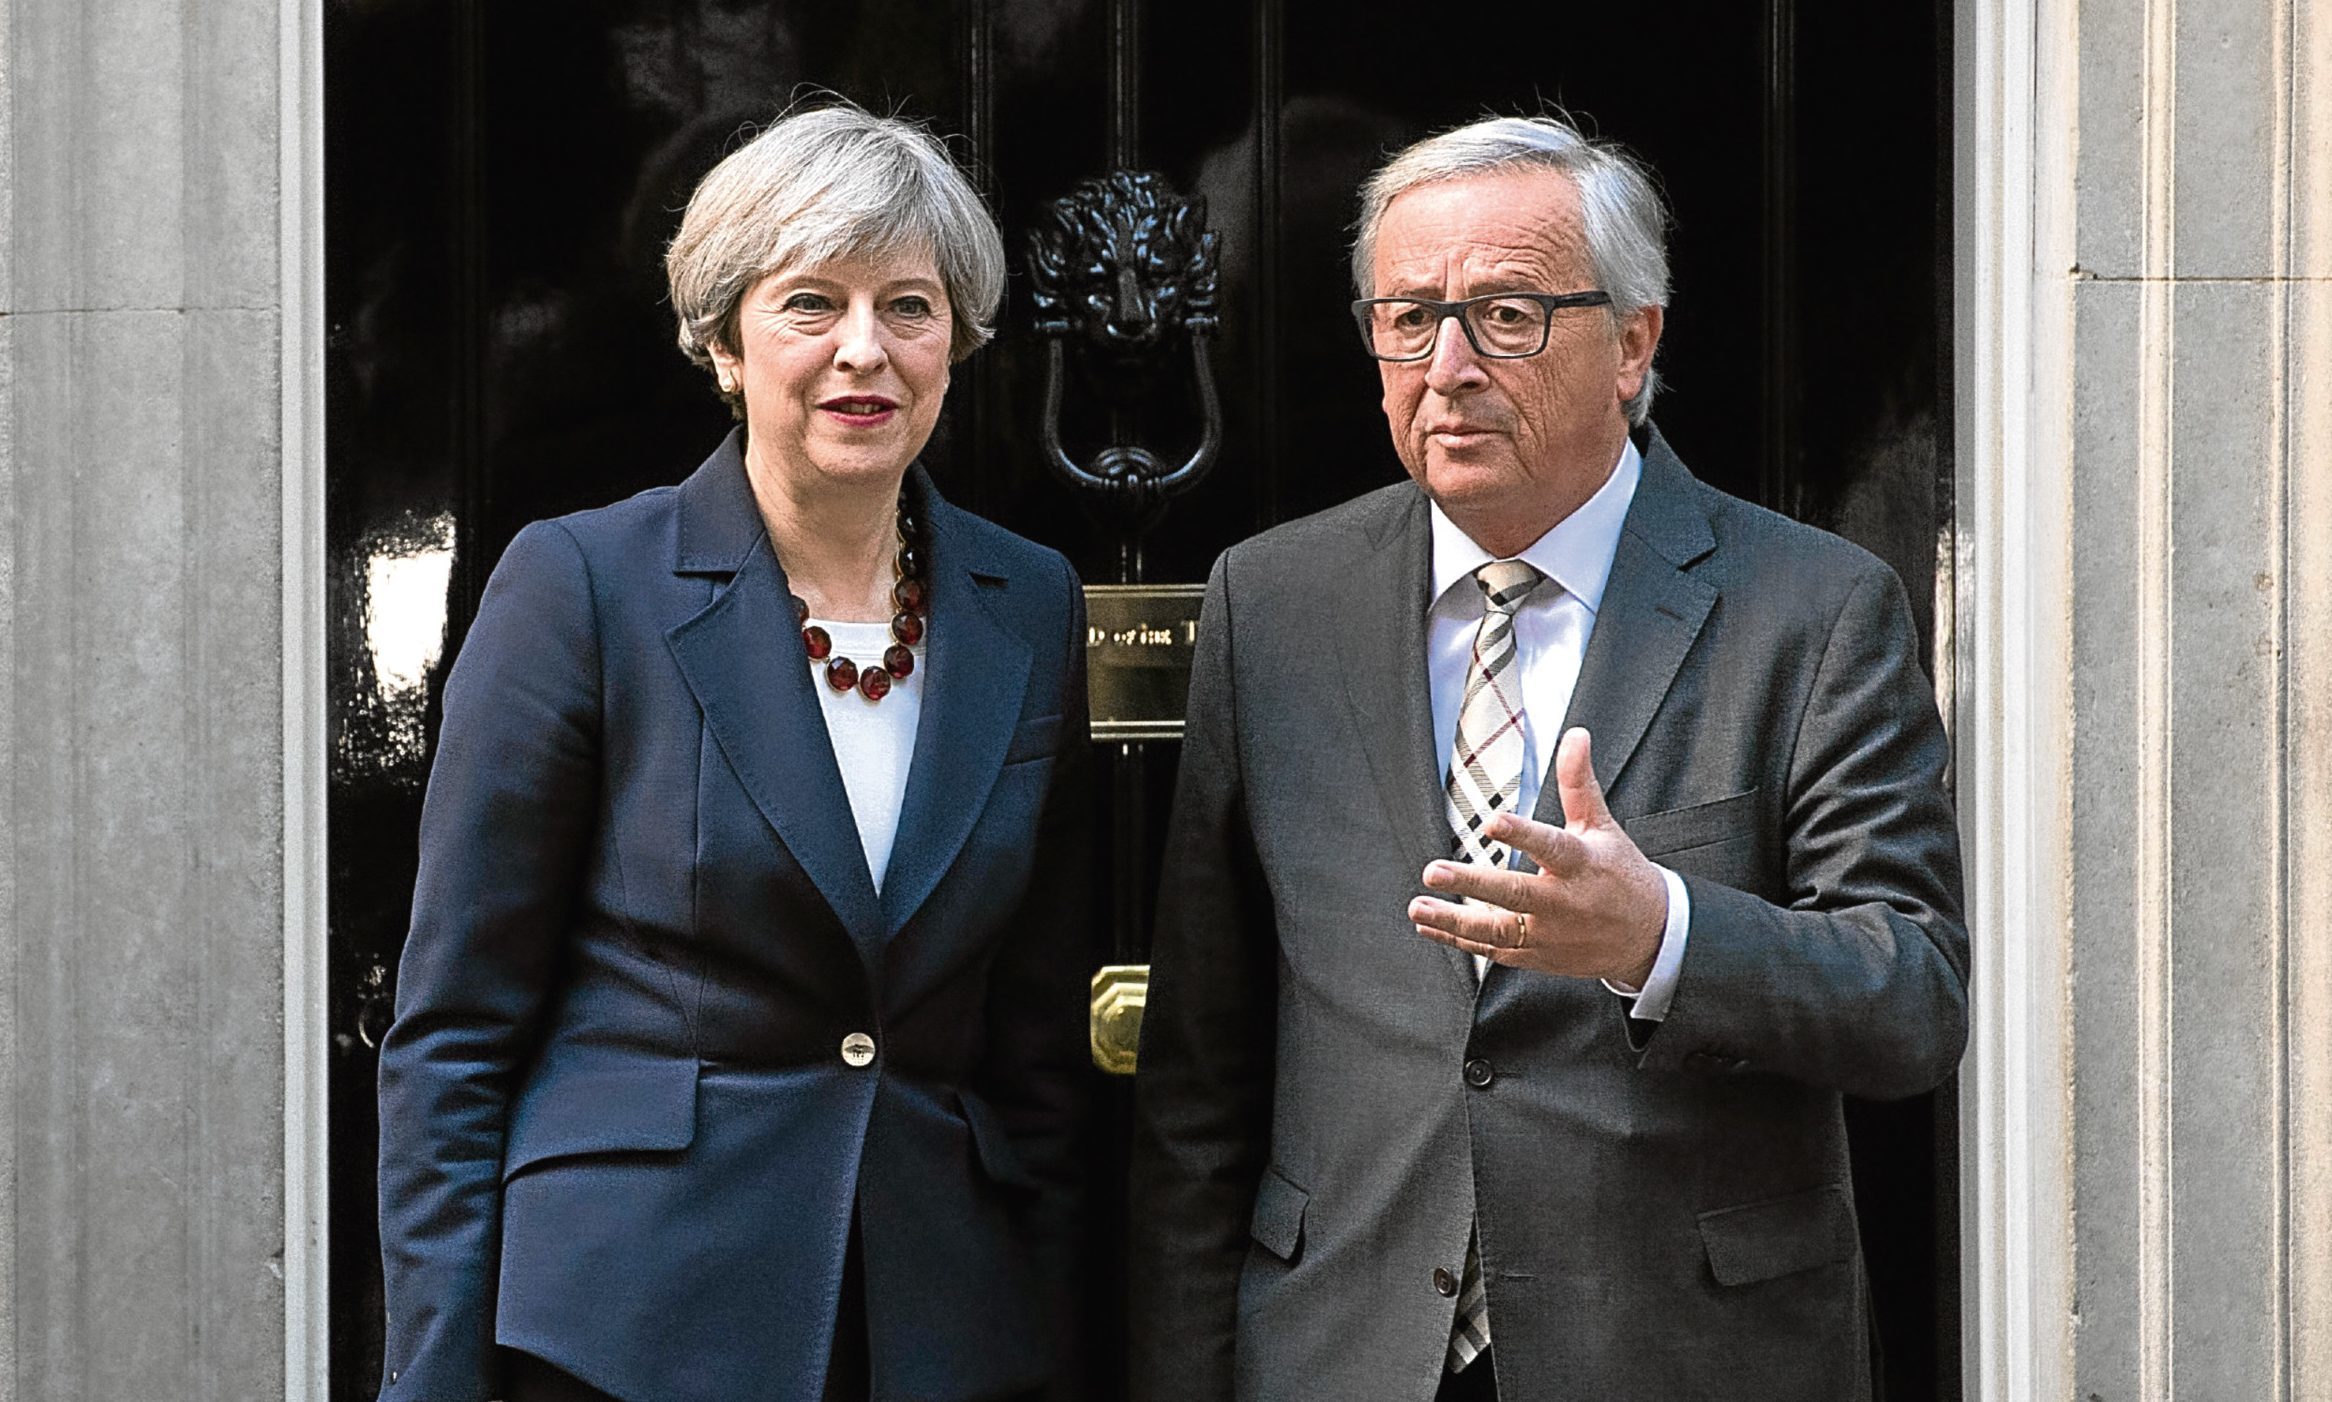 Theresa May with European Commission president Jean-Claude Juncker (Carl Court/Getty Images)